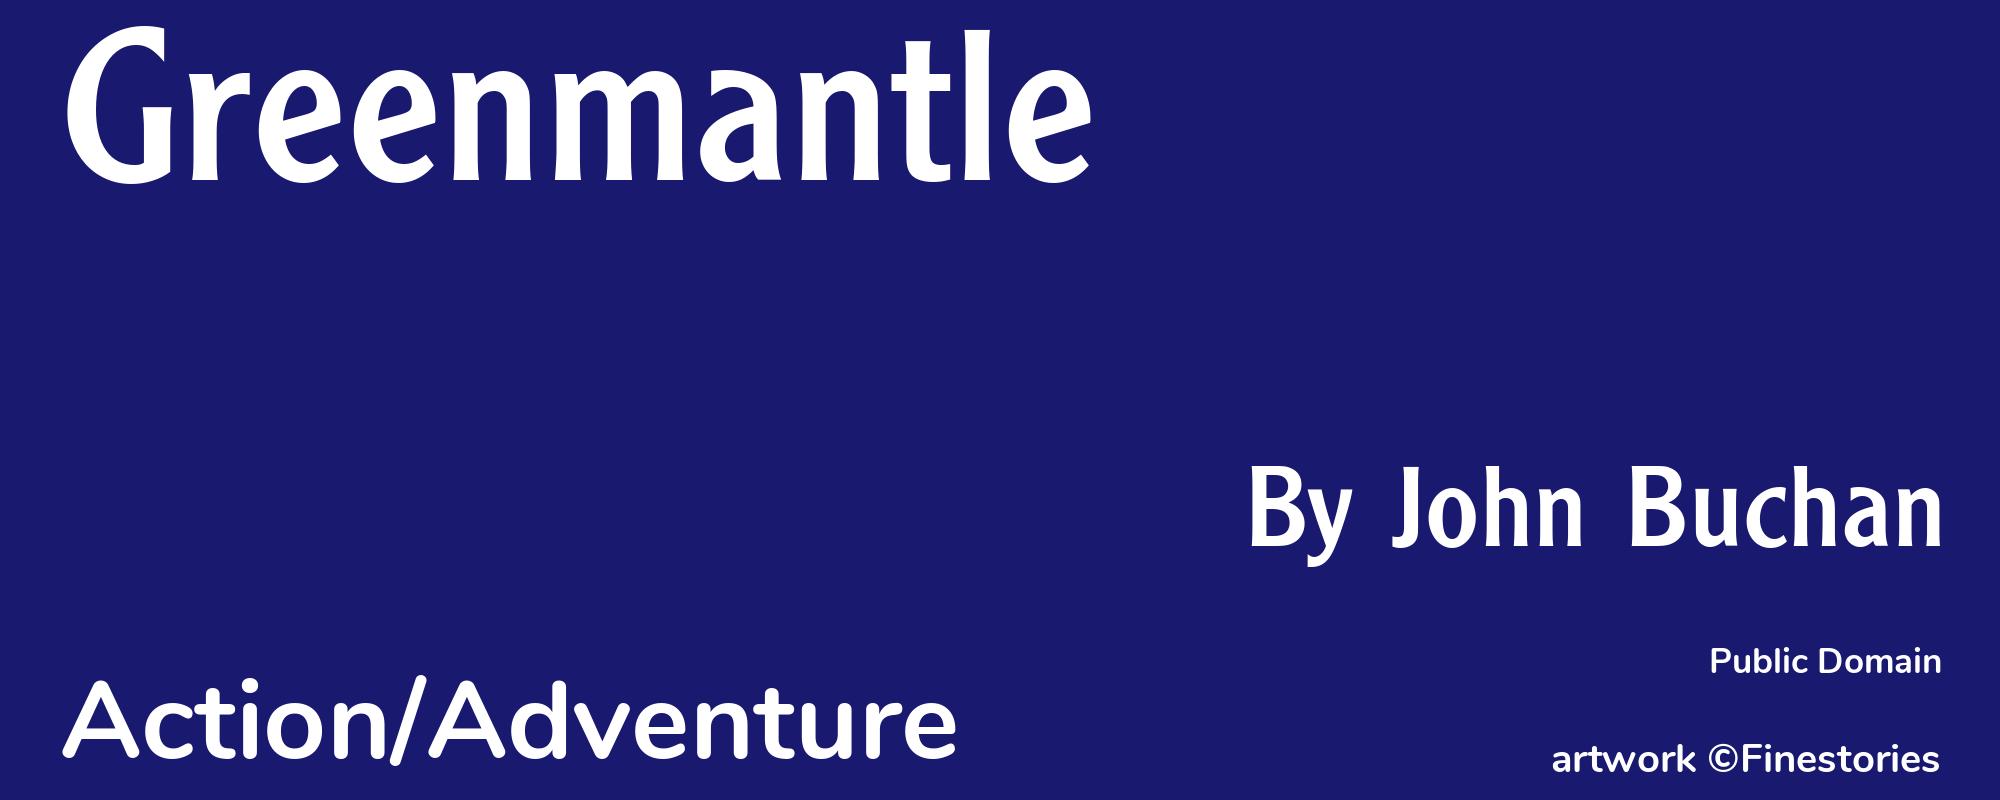 Greenmantle - Cover